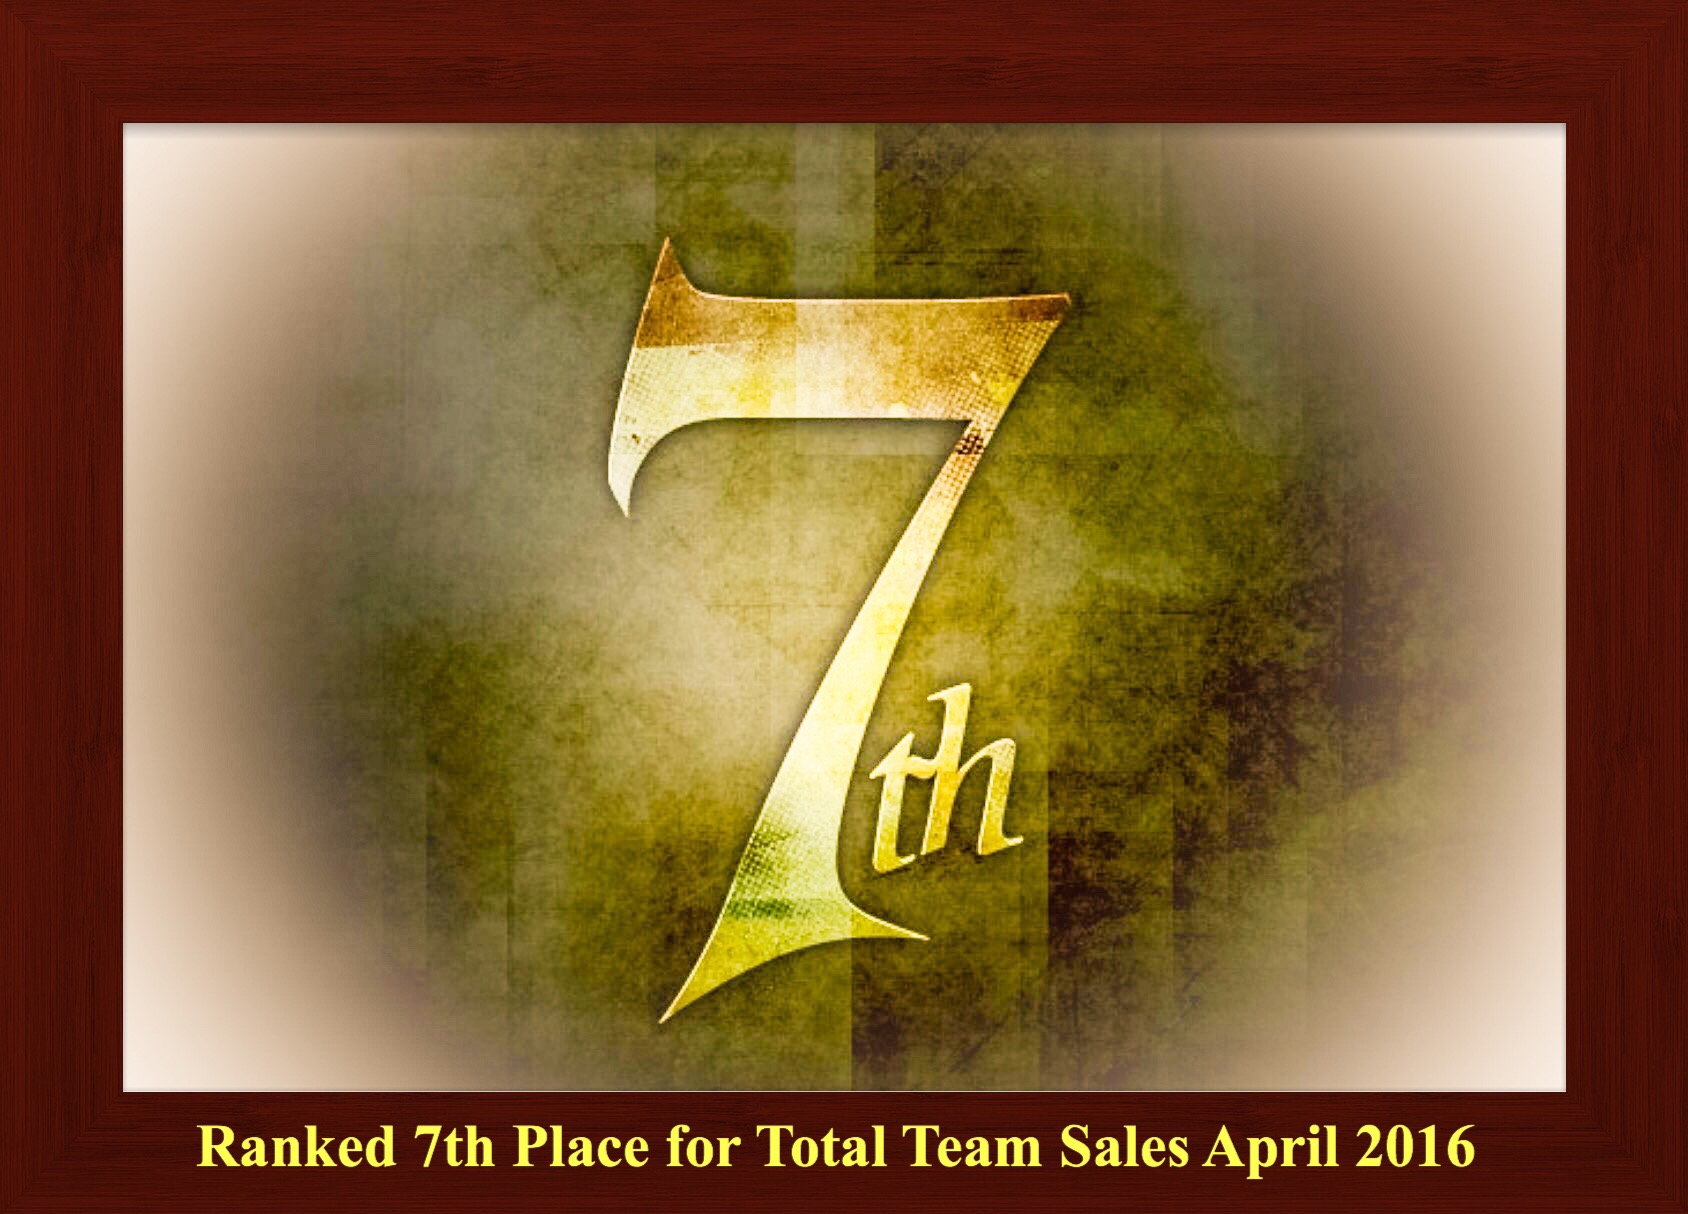 Ranked #7 for Team Sales in April 2016 